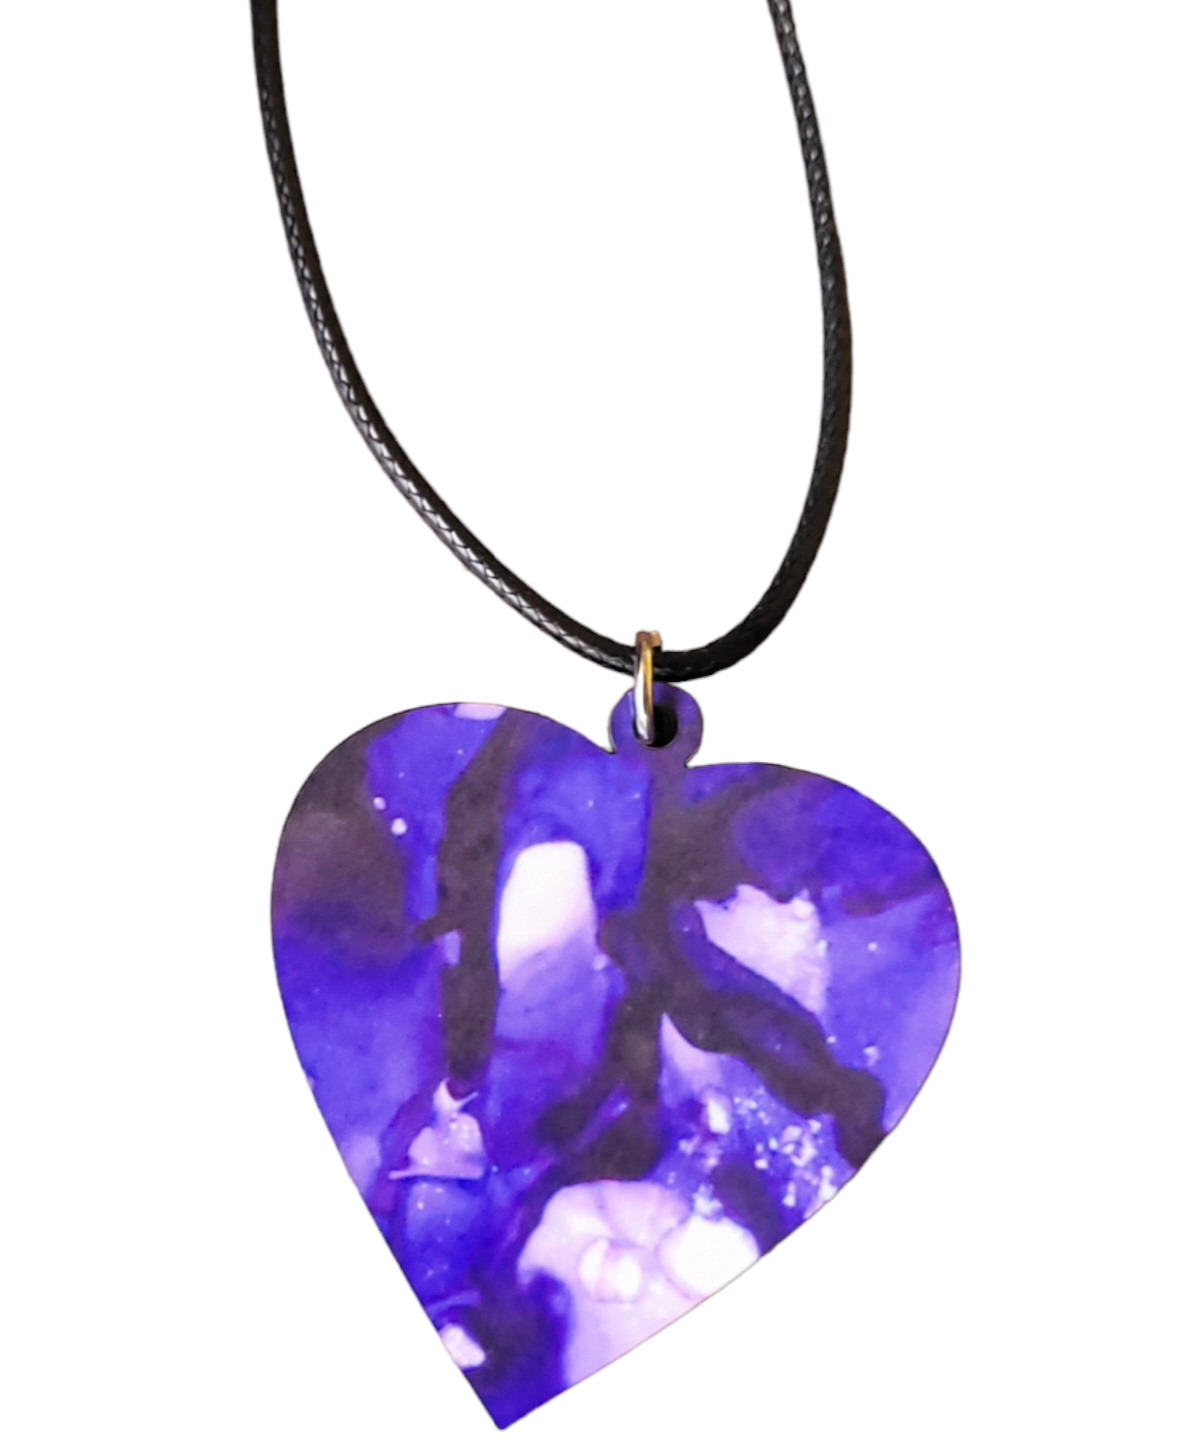 Heart-Shaped Necklaces